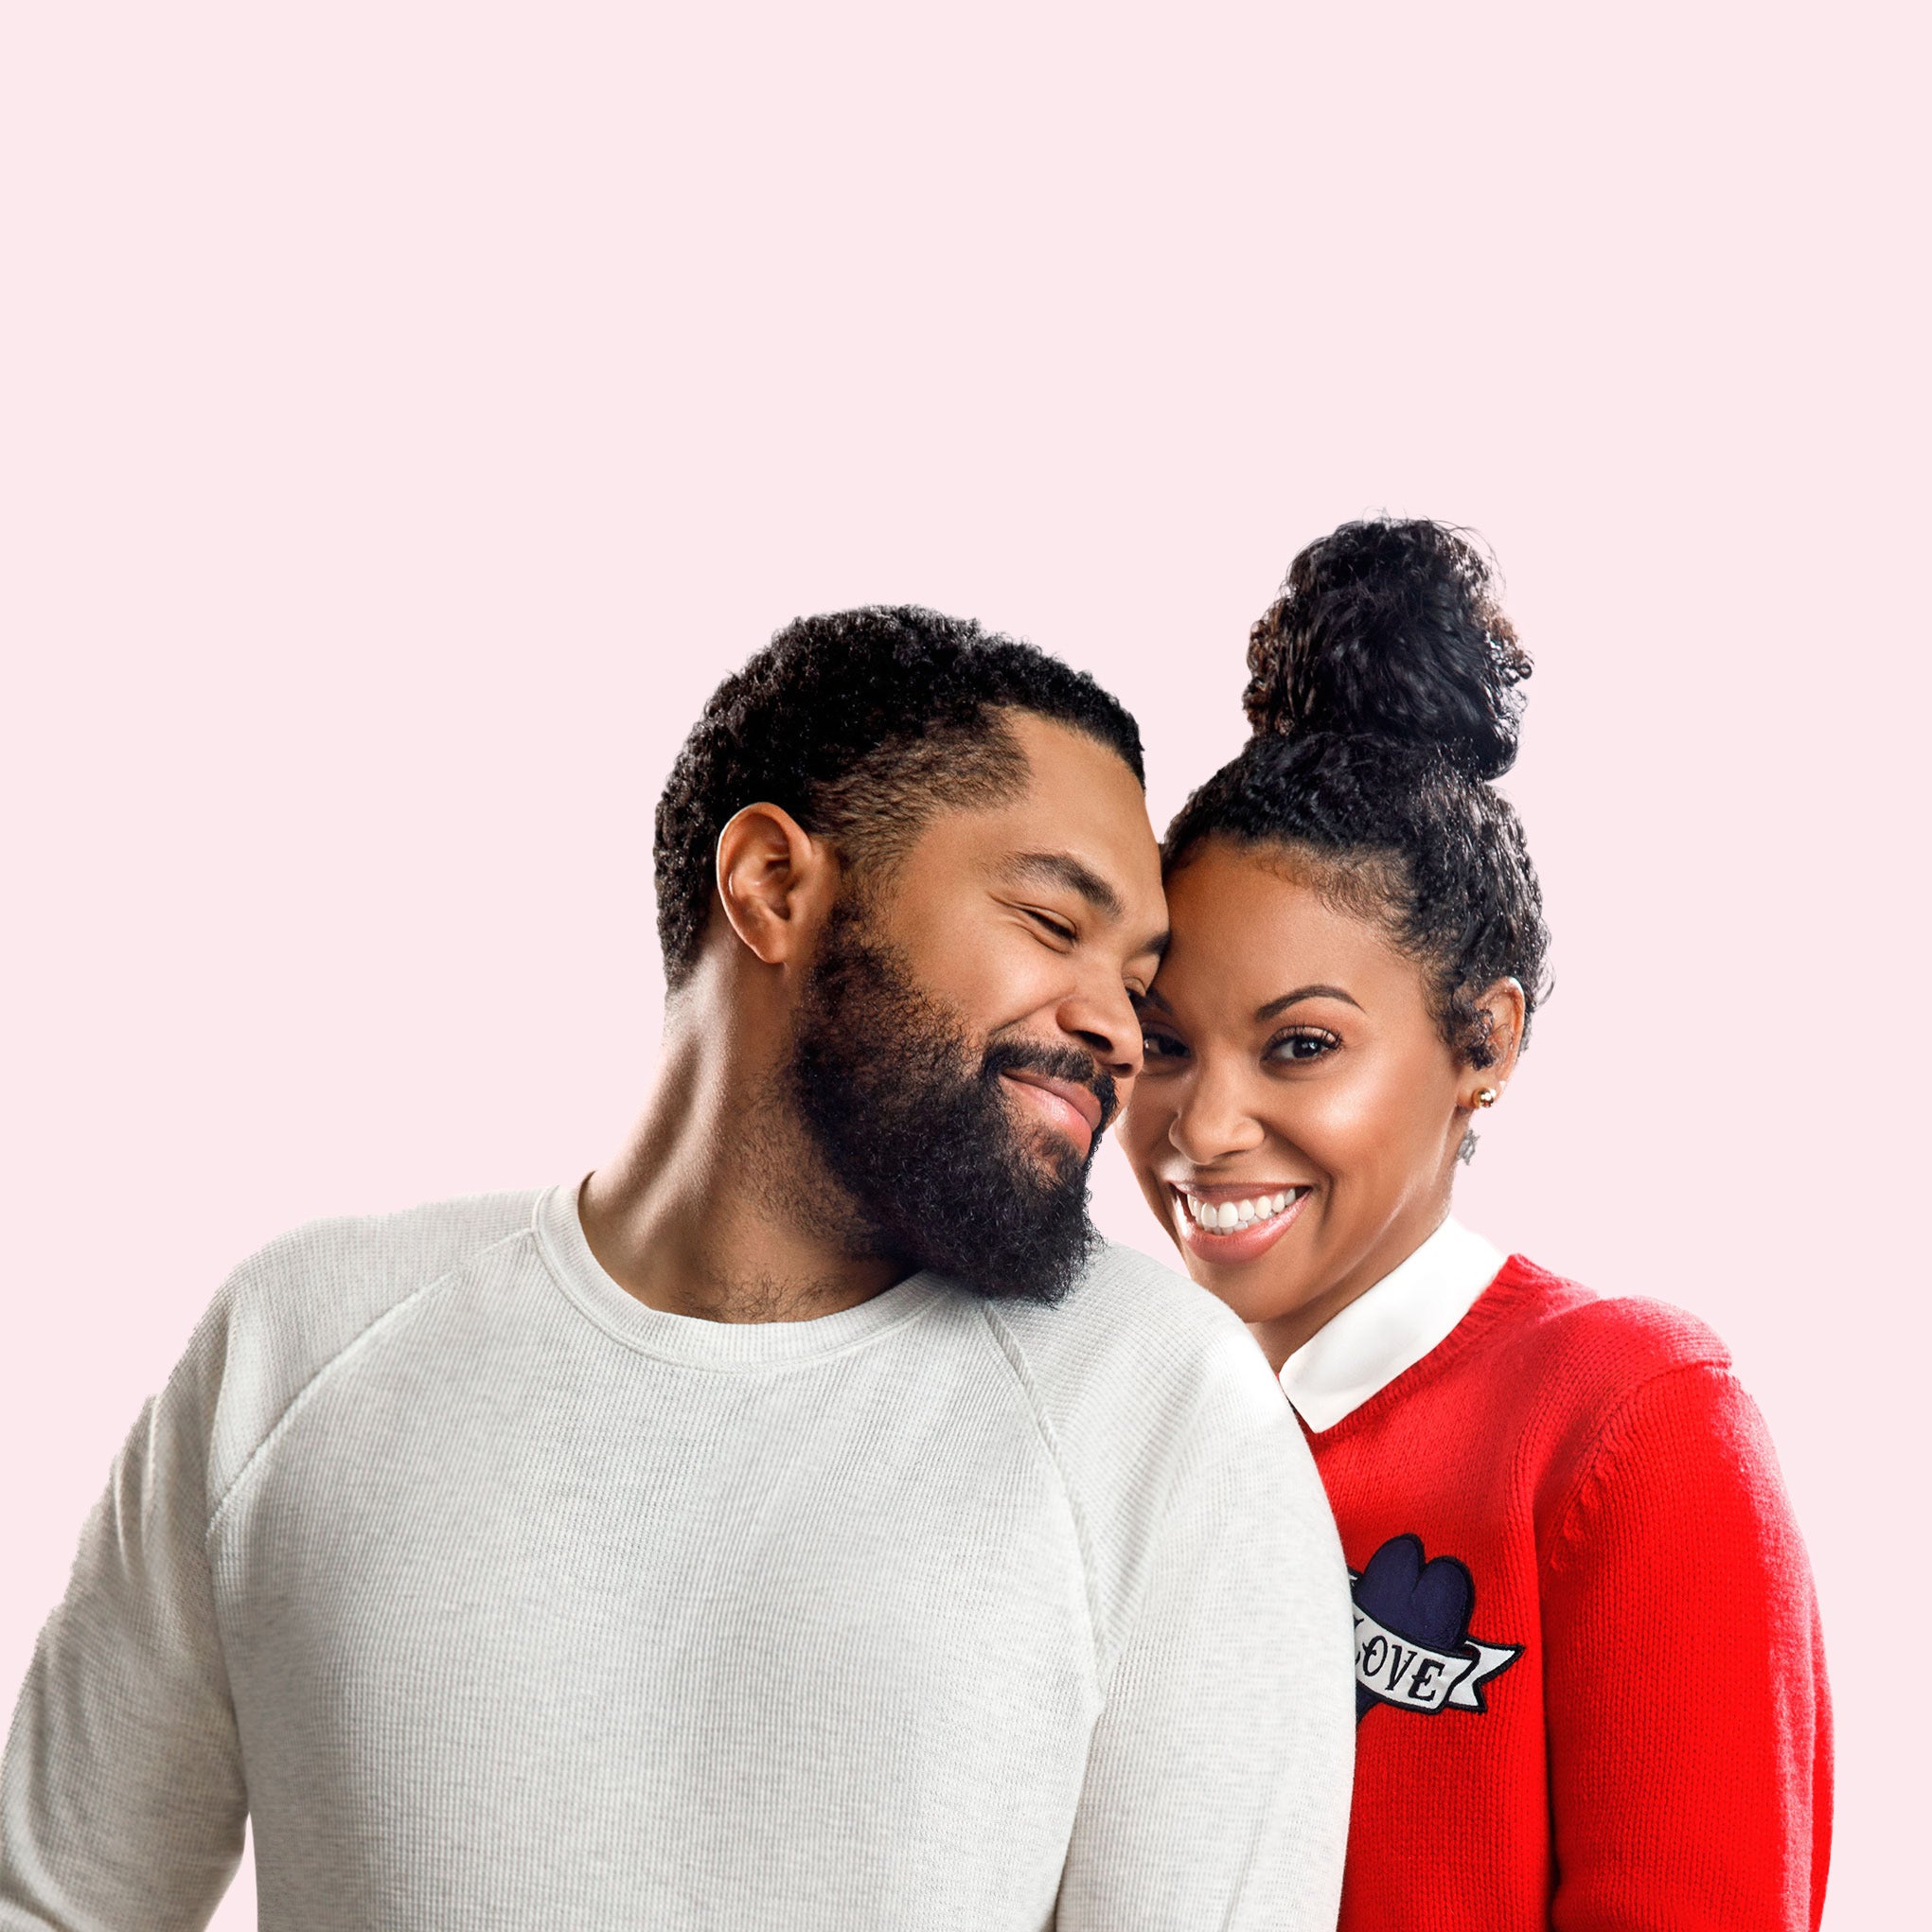 Meet The Millennial Love Leaders Committed To Promoting Healthy And Happy Relationships
